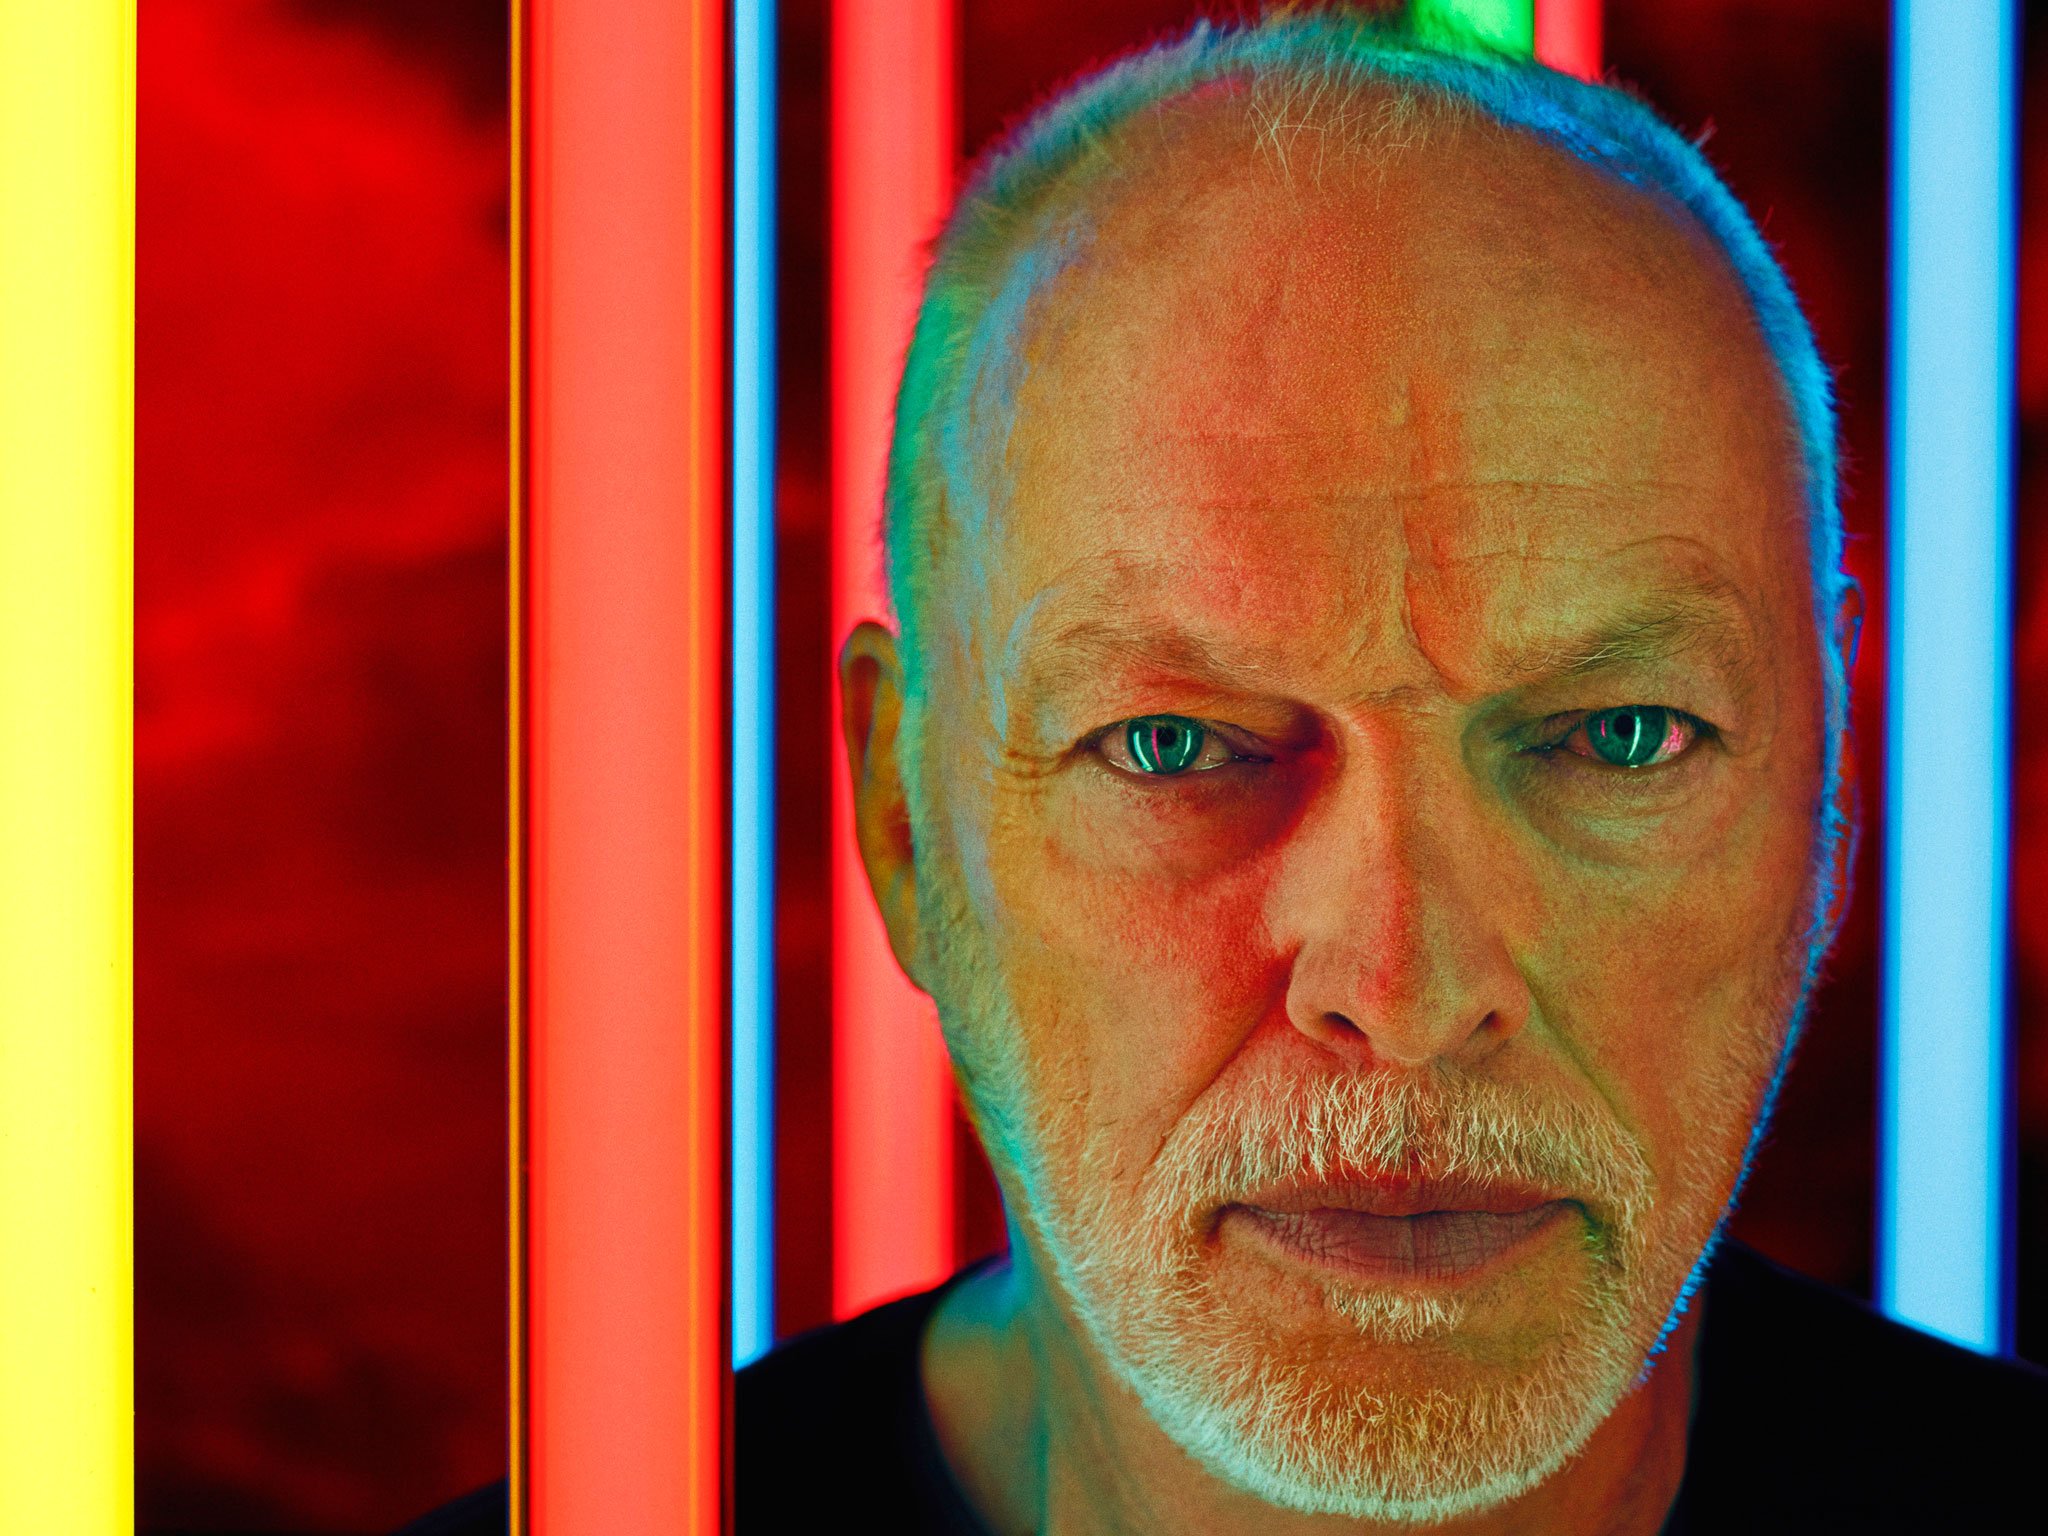 Happy Birthday to Pink Floyd\s David Gilmour, born March 6!
\"Comfortably Numb\" 